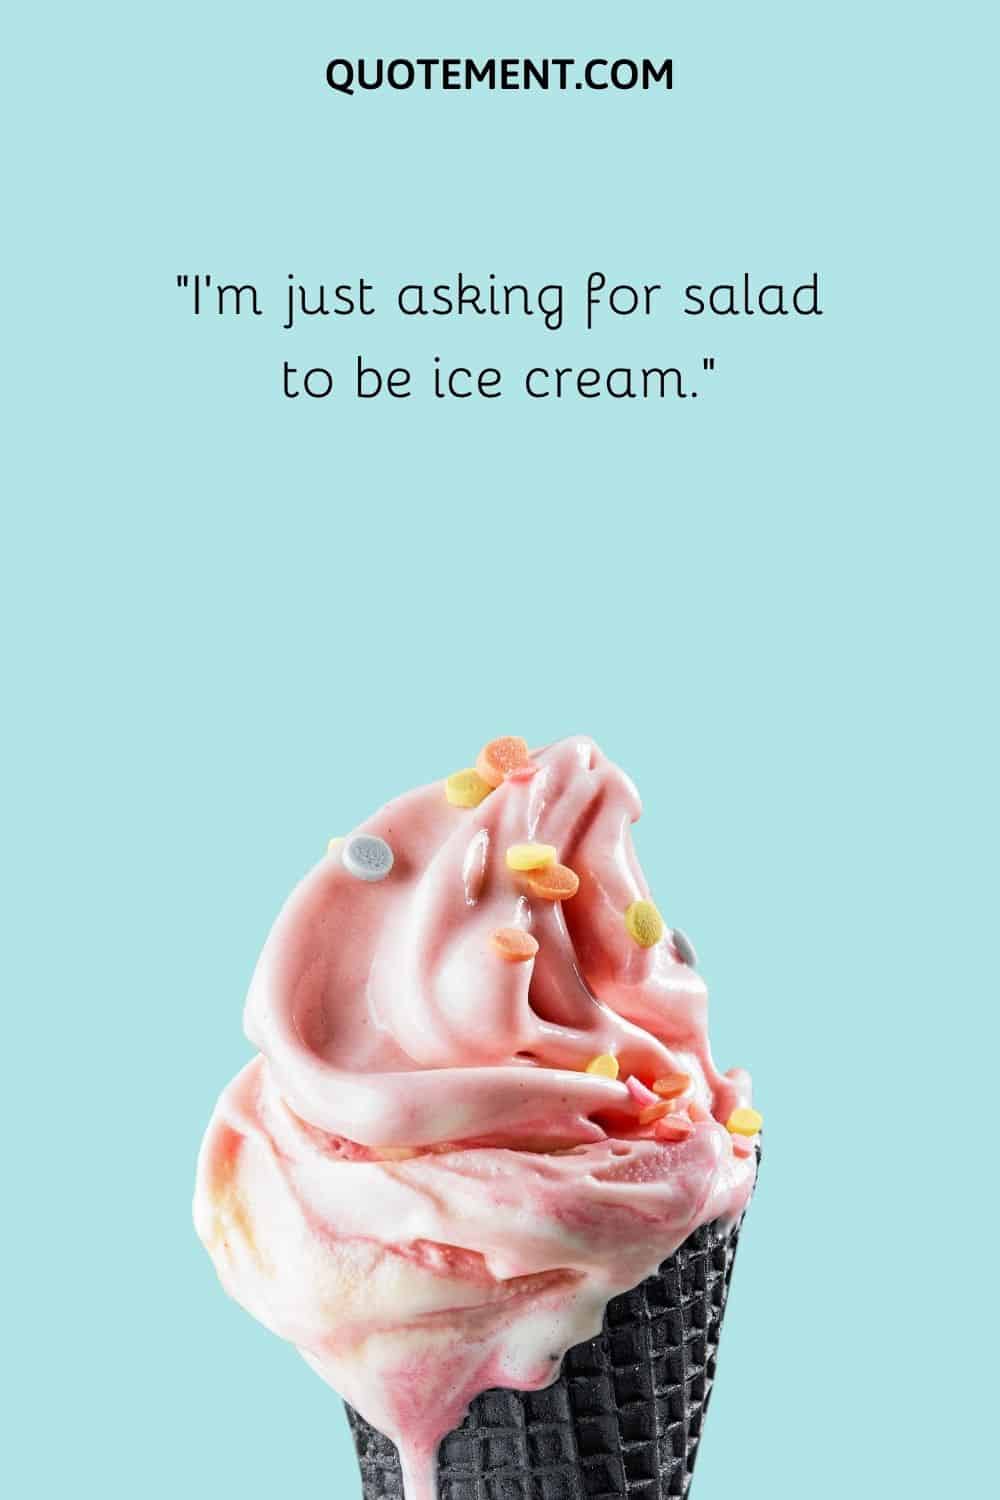 I’m just asking for salad to be ice cream